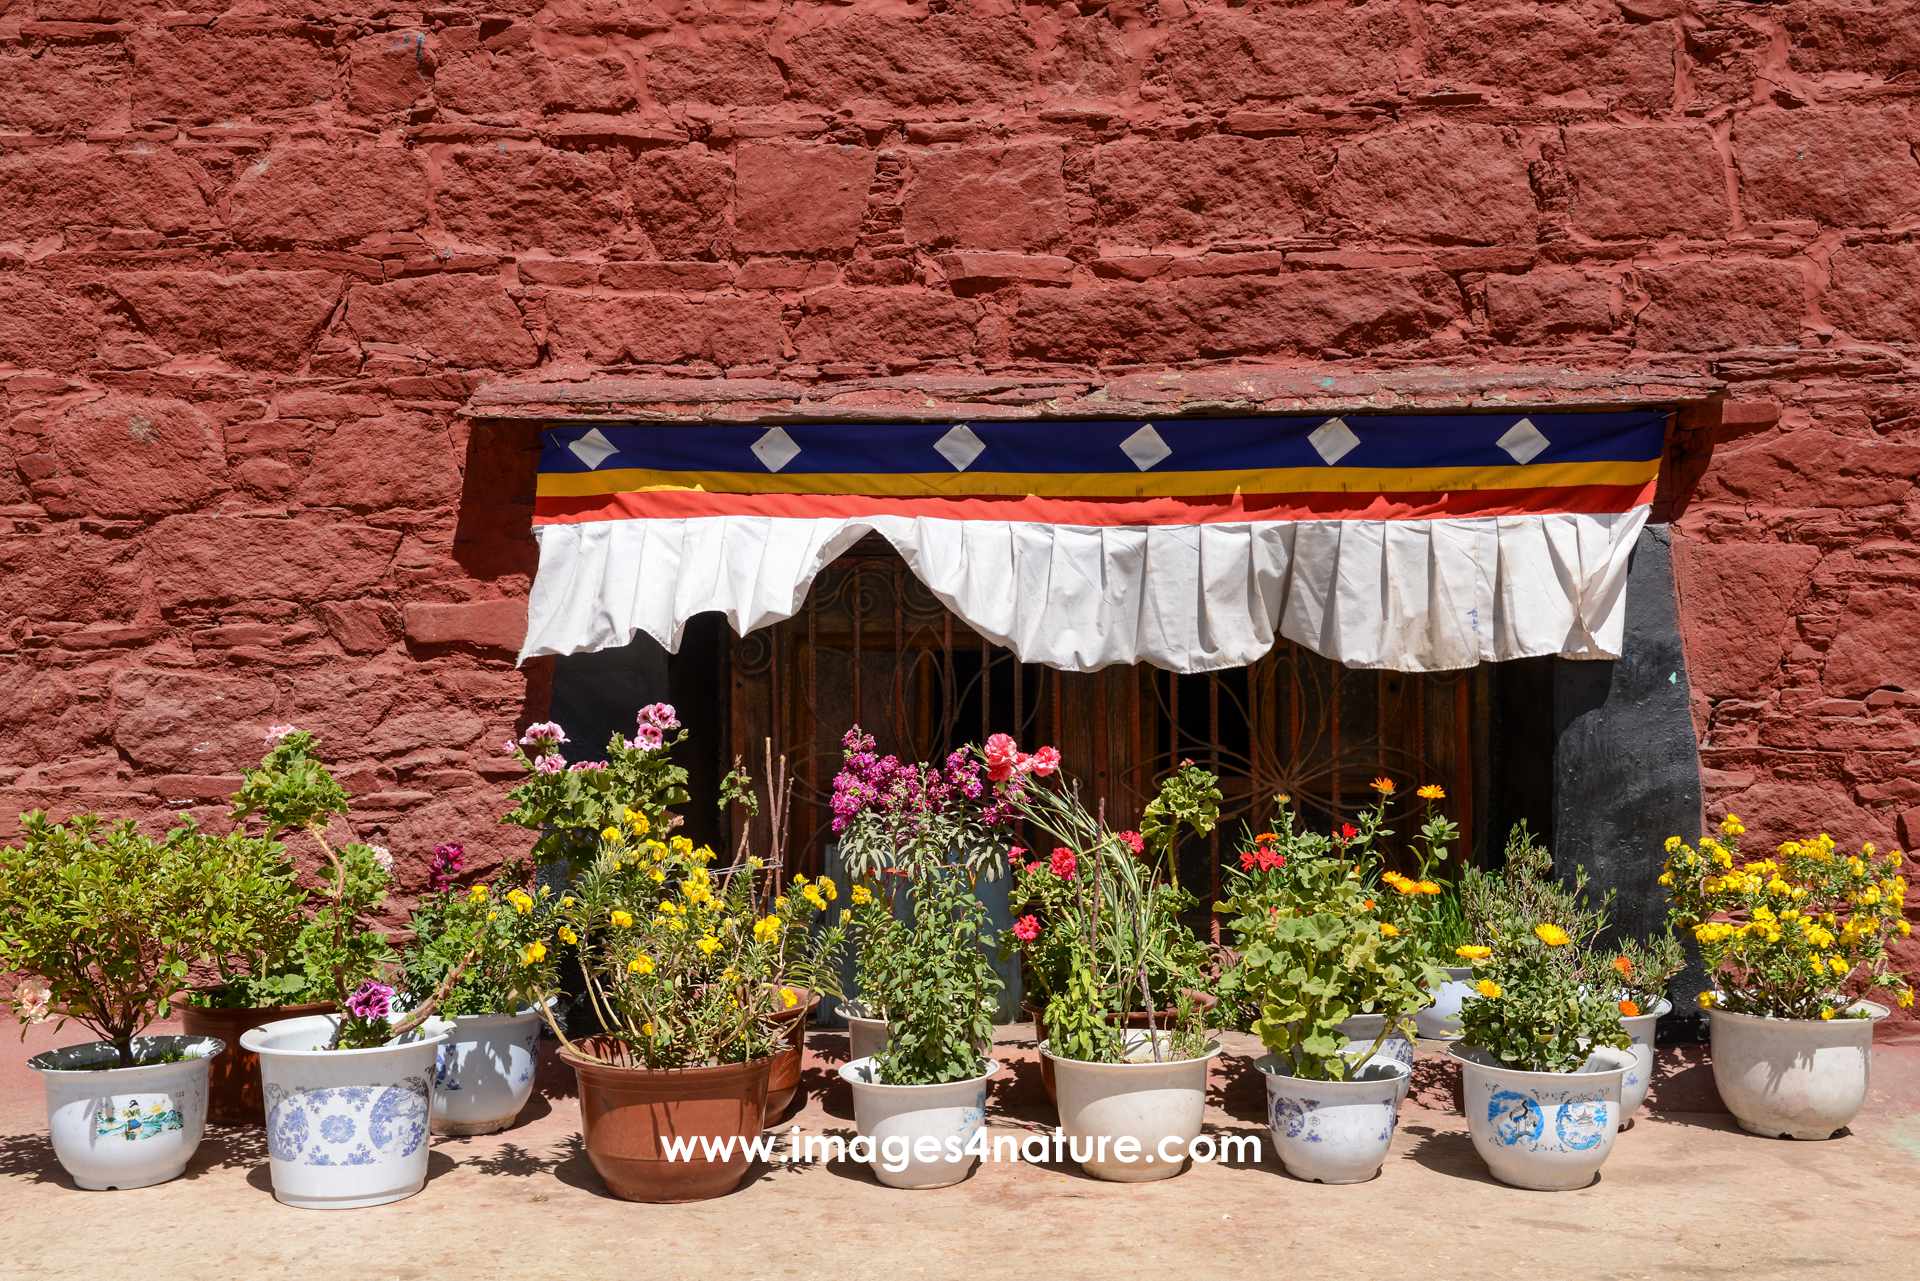 Collection of many flower pots with plants in full blossom against red wall